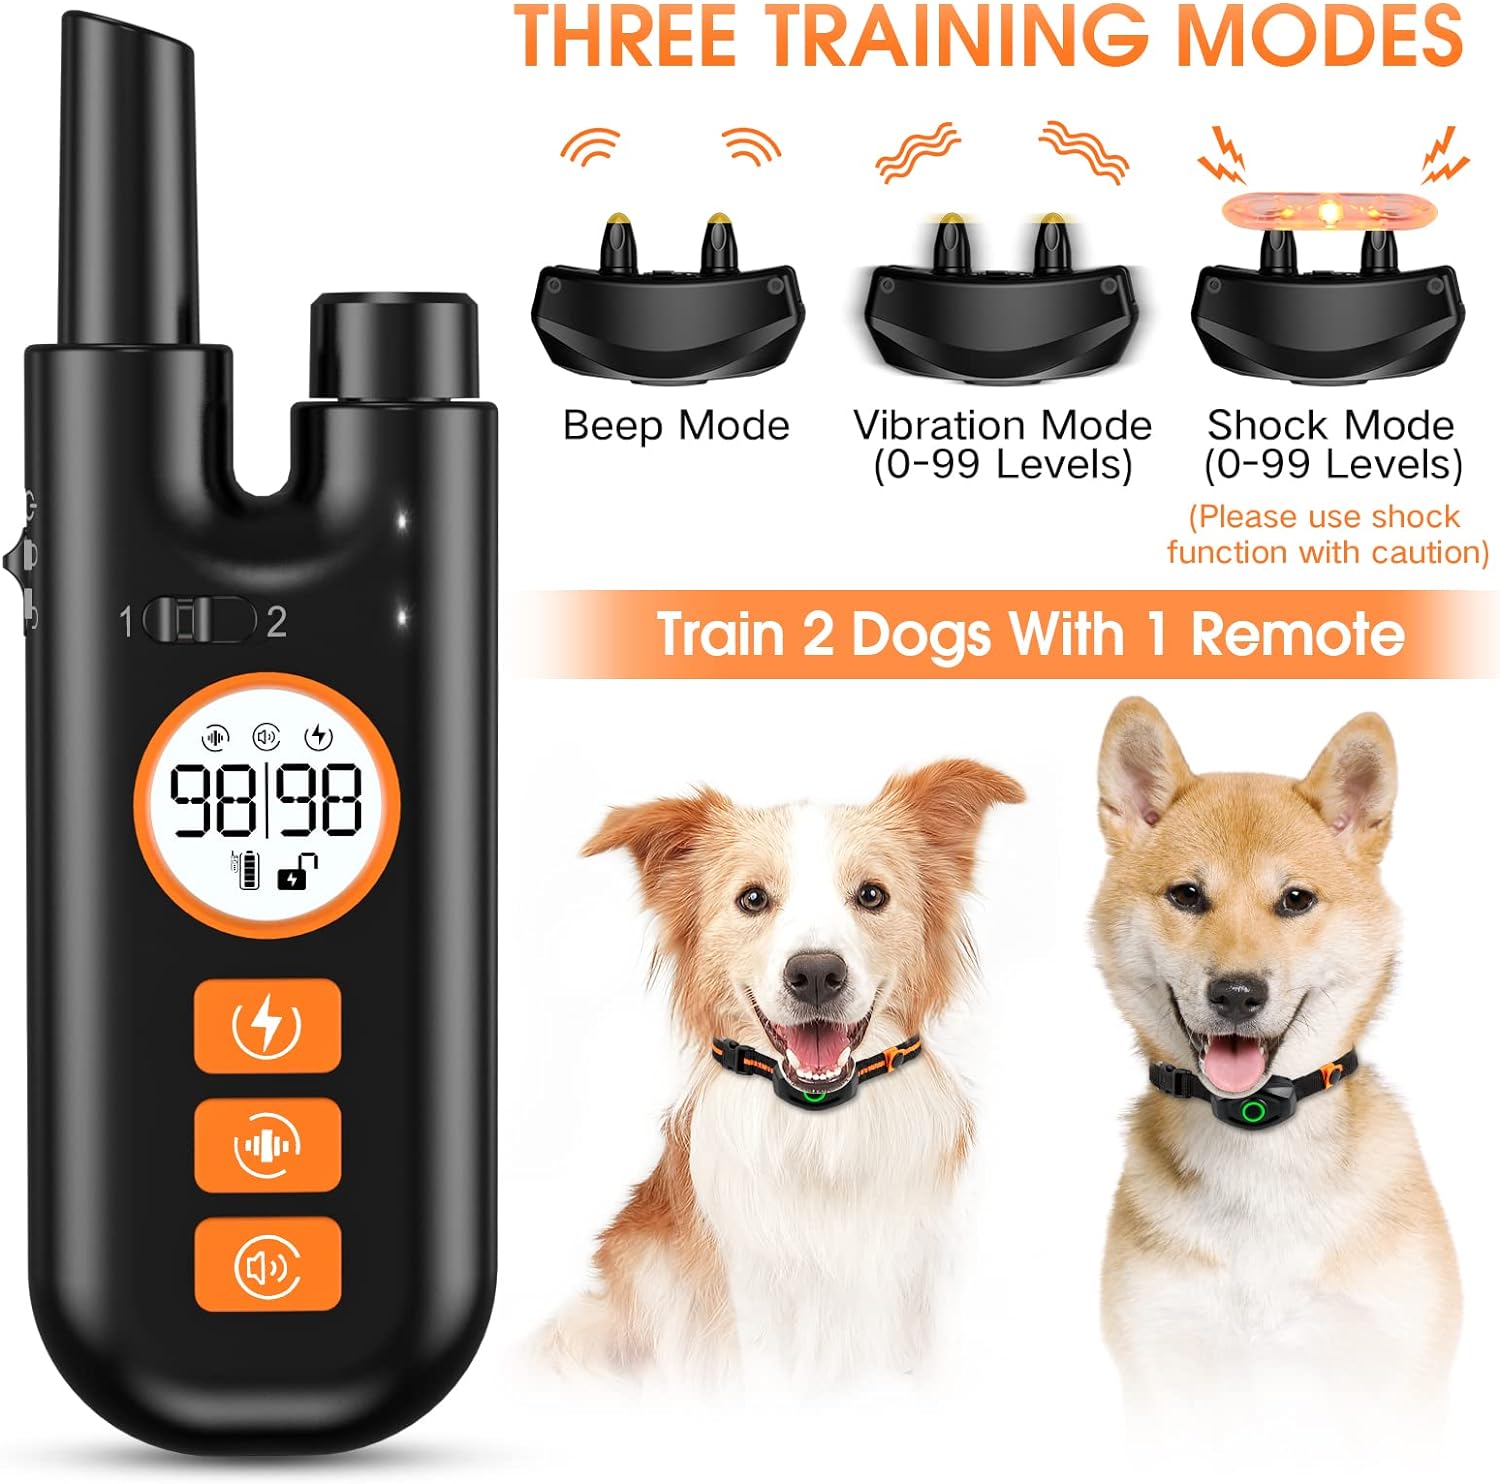 MAISOIE Dog Training Collar, 2 Dogs Shock Collar with Remote for Range 1300ft, 3 Training Modes, Beep, Vibration, Shock, IPX7 Waterproof Rechargeable Electric Shock Collar for Small Medium Large Dogs